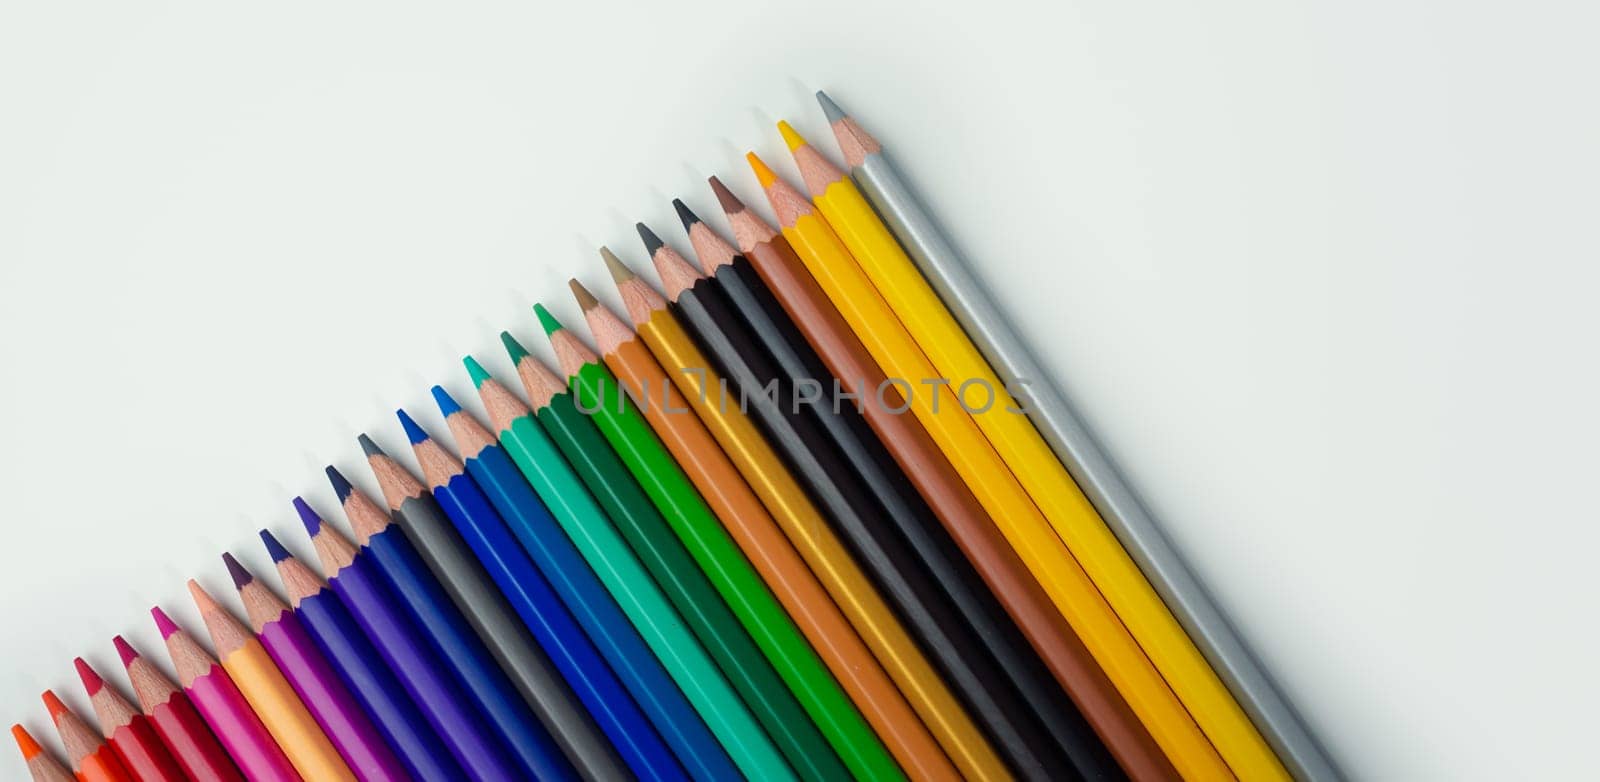 Set of colored pencils on a white background That is arranged in a bar graph, Color pencils on white background, Close up, seamless colored pencils row with wave on lower side, line pencils. by Unimages2527